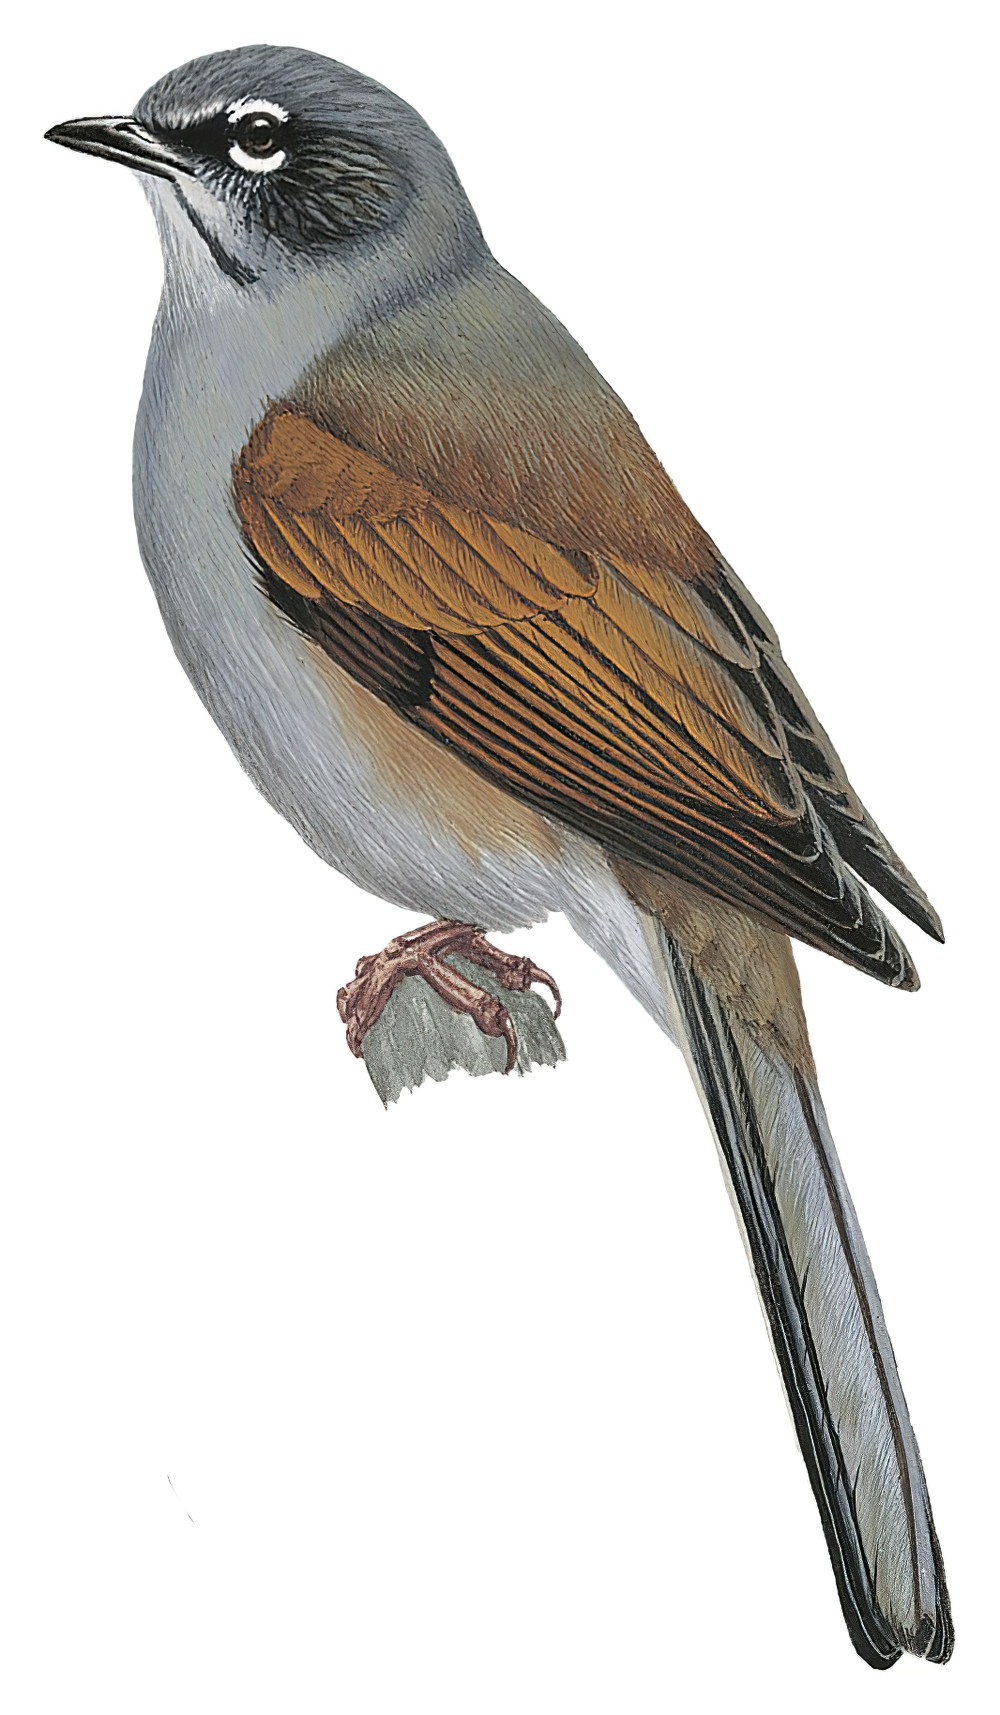 Brown-backed Solitaire / Myadestes occidentalis